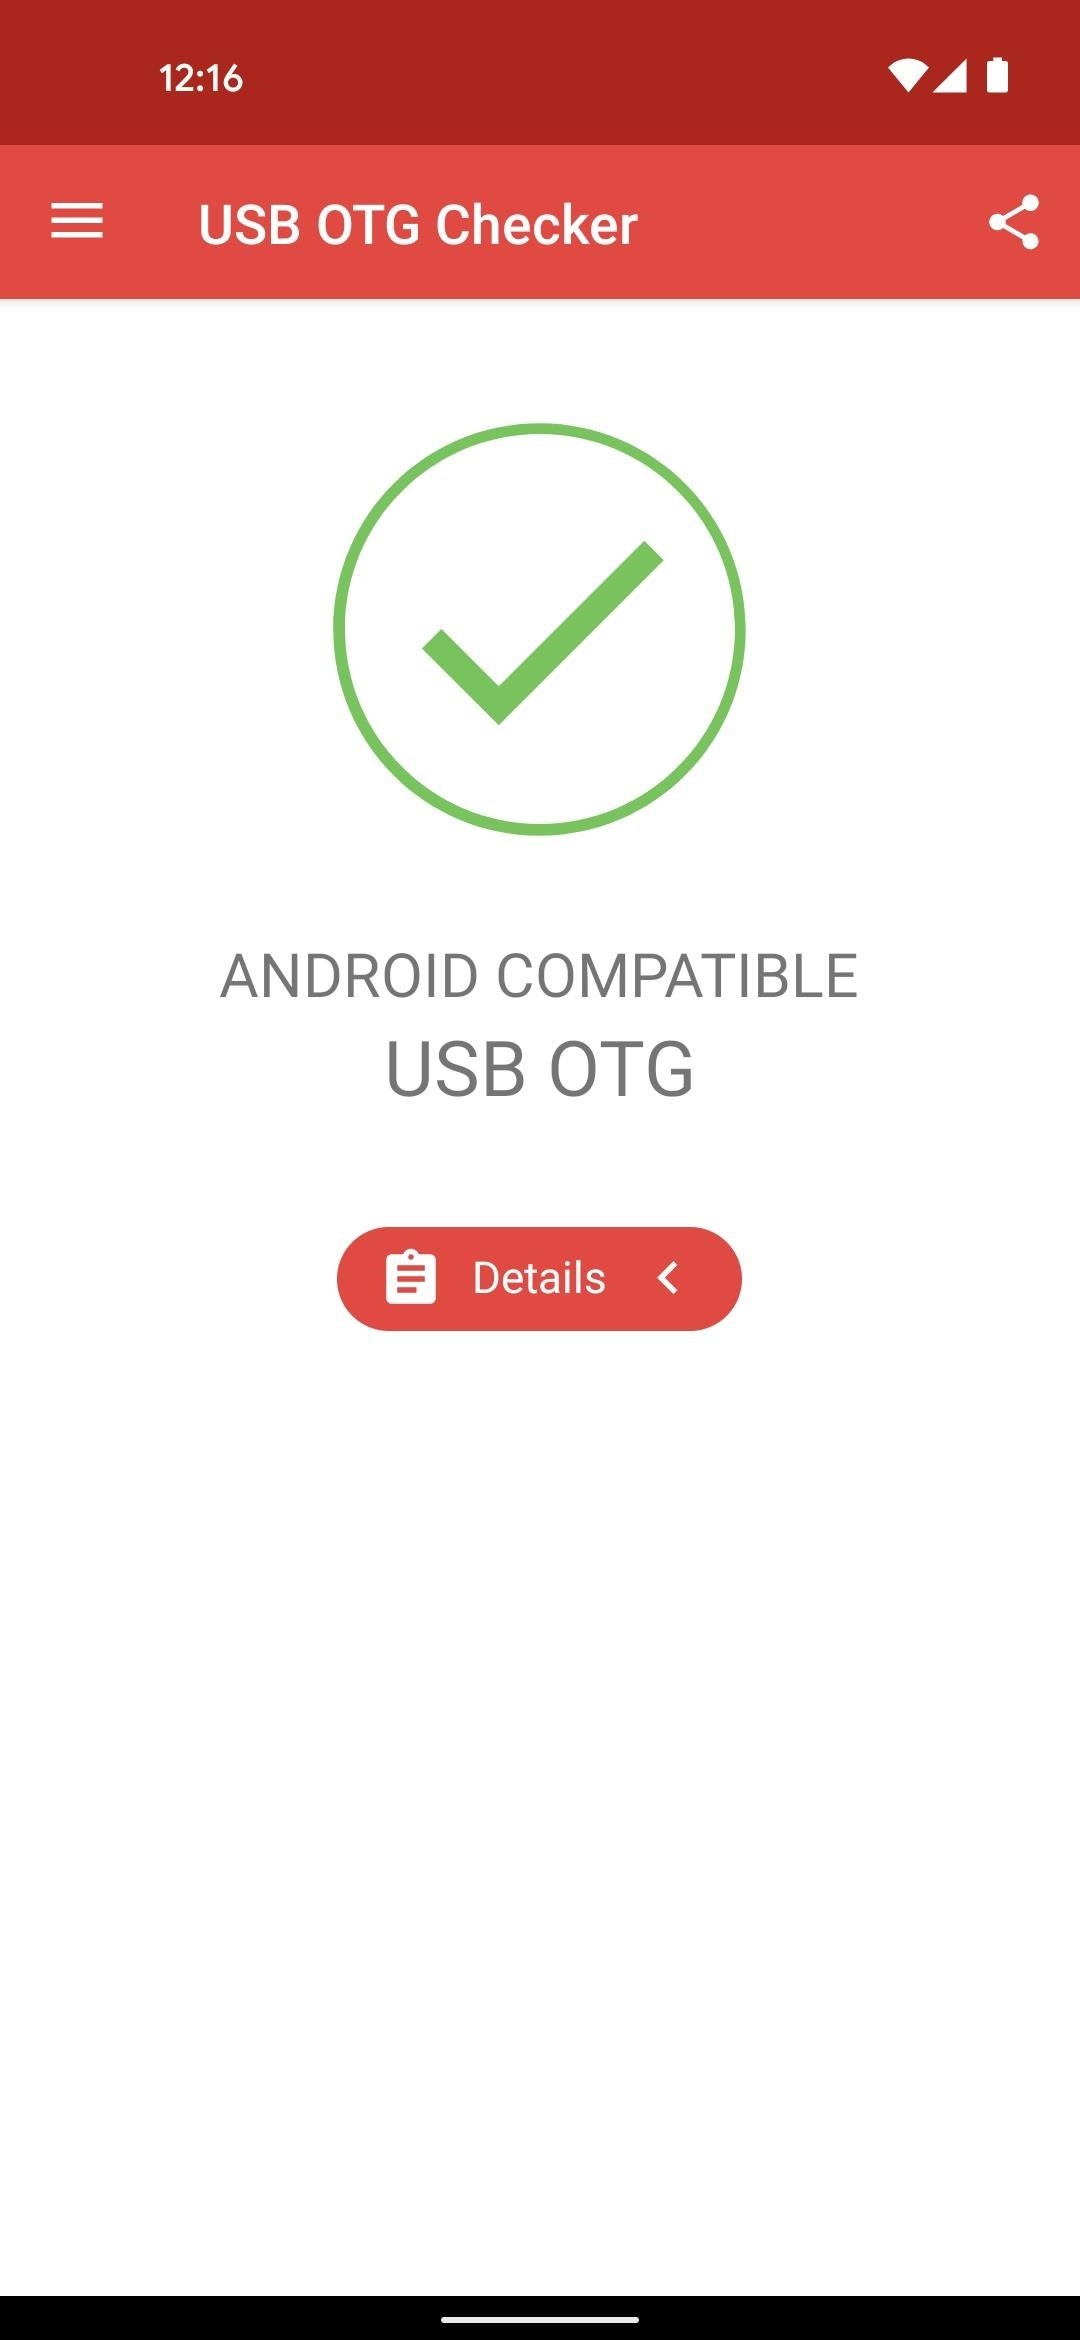 How to Check Your Phone for USB OTG Support to Connect Flash Drives, Control DSLRs & More